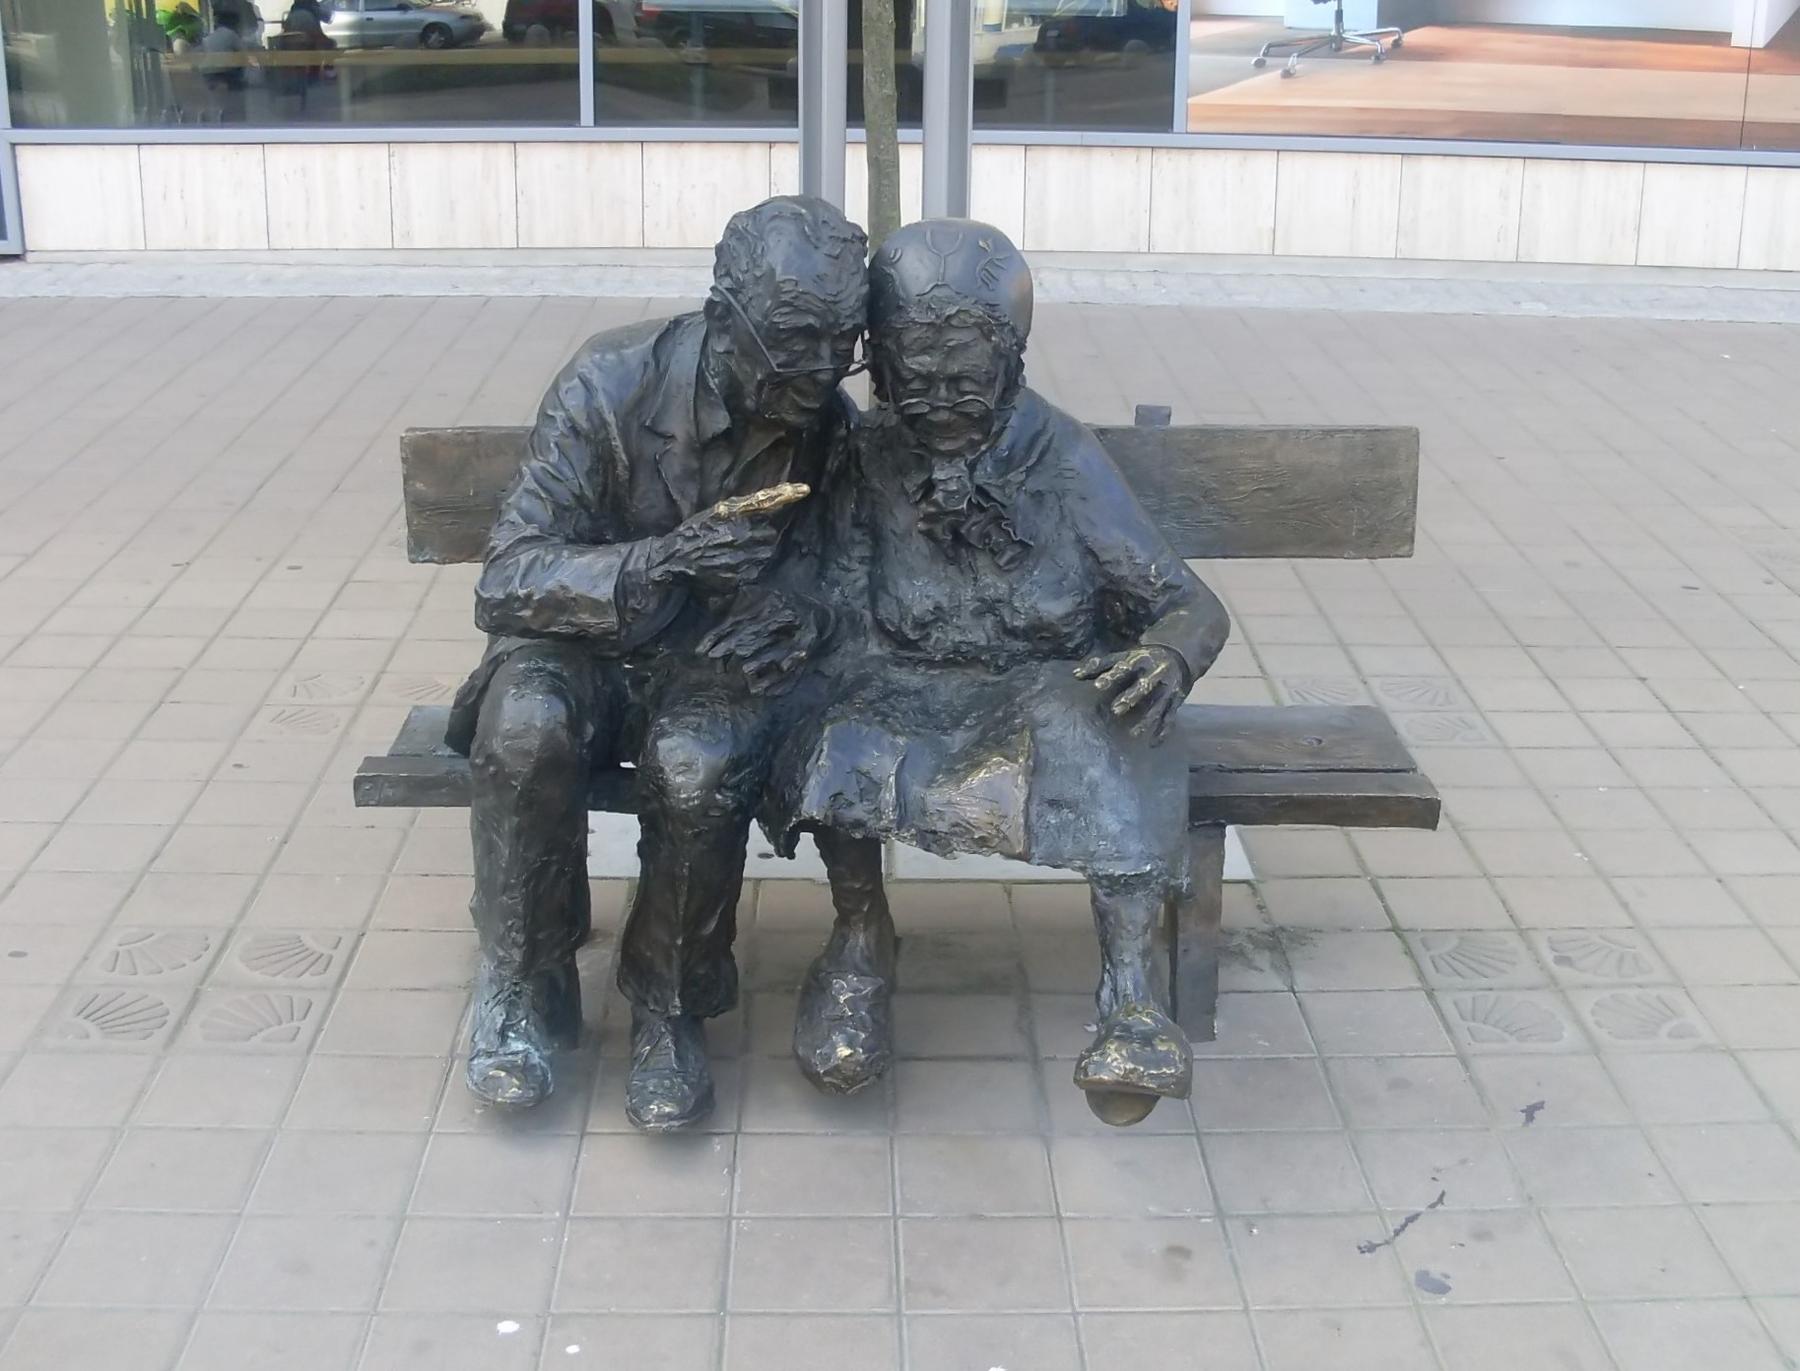 Old marriage at Plac Kaszubski - a statue of two people sitting on a bench